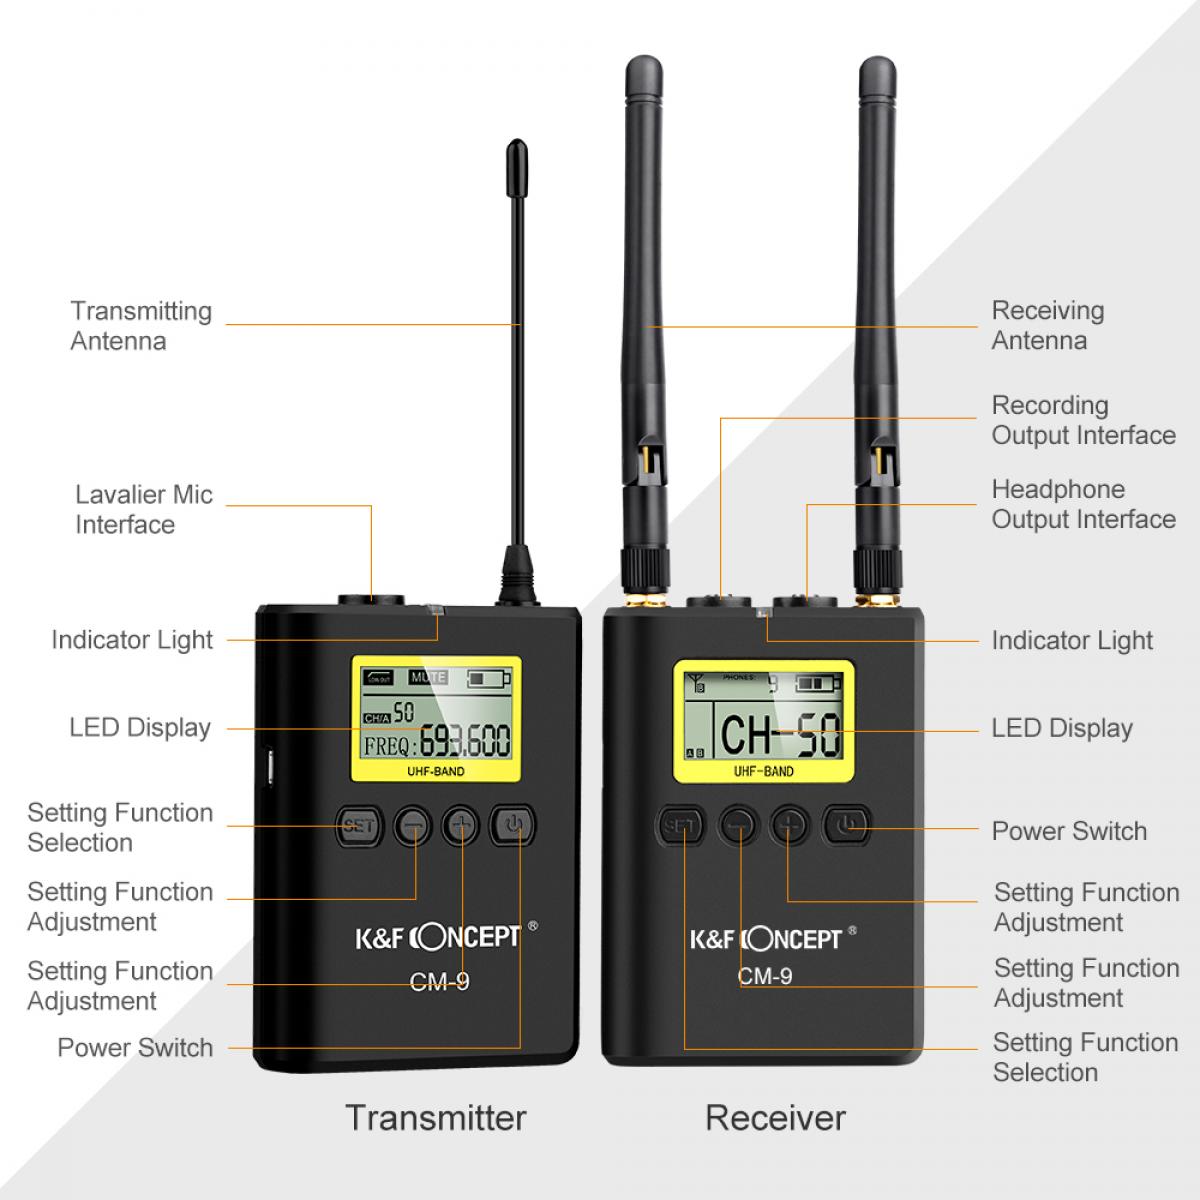 UHF 100M Remote Wireless Lavalier Microphone 100 Channels with 2 Transmitters+1 Dual-channel Receiver for Presentation&Interview CM-10